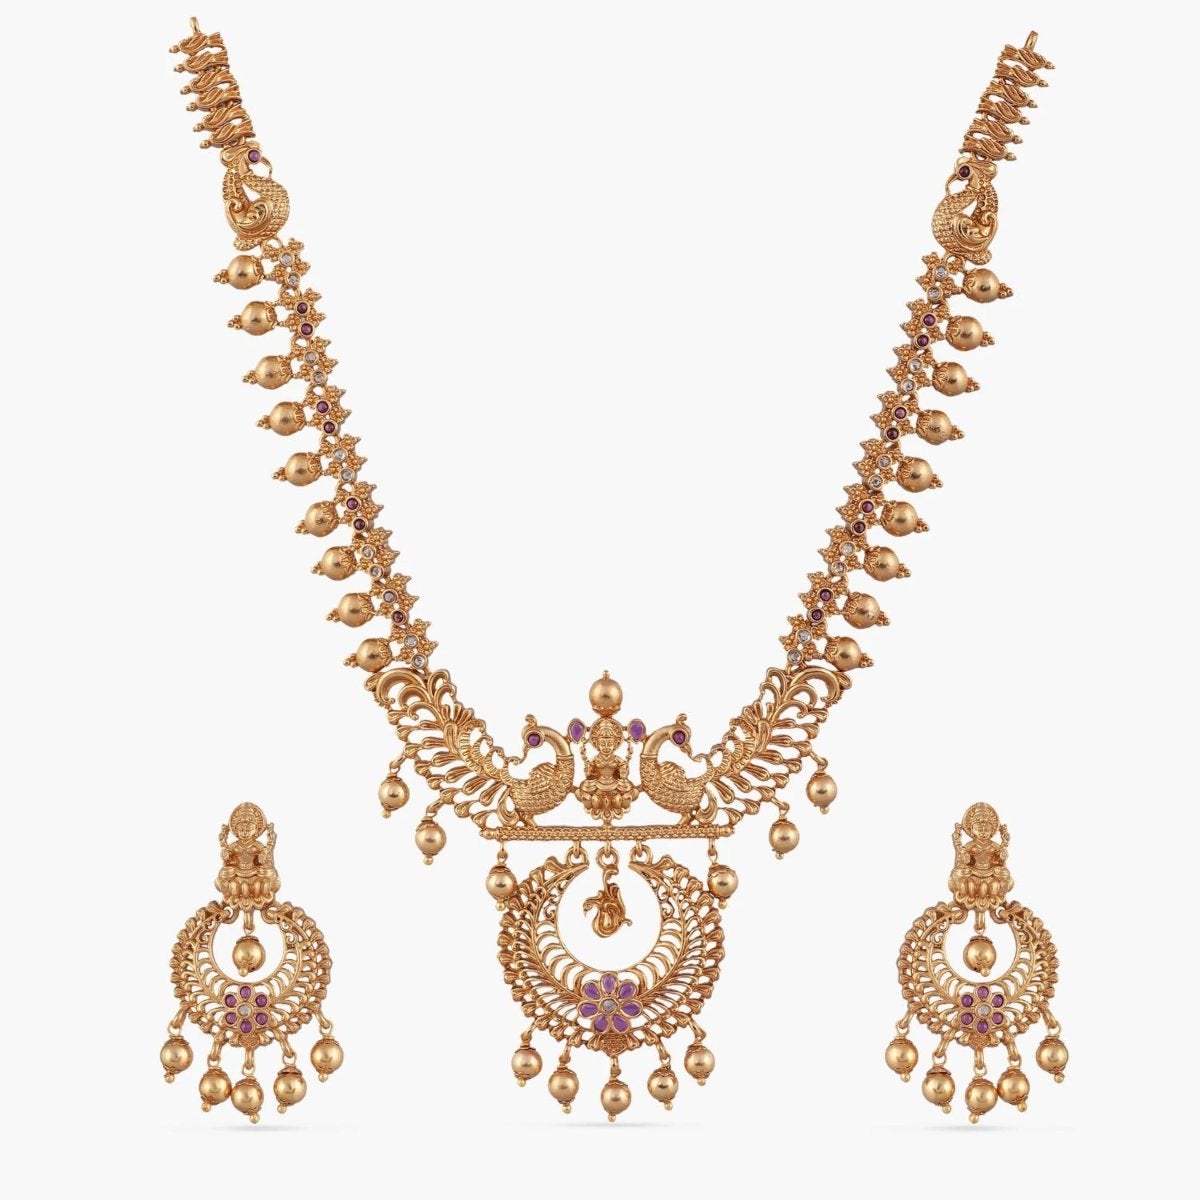 A picture of an Indian artificial jewelry set with a gold plated necklace and earrings featuring a peacock motifs in pendant.